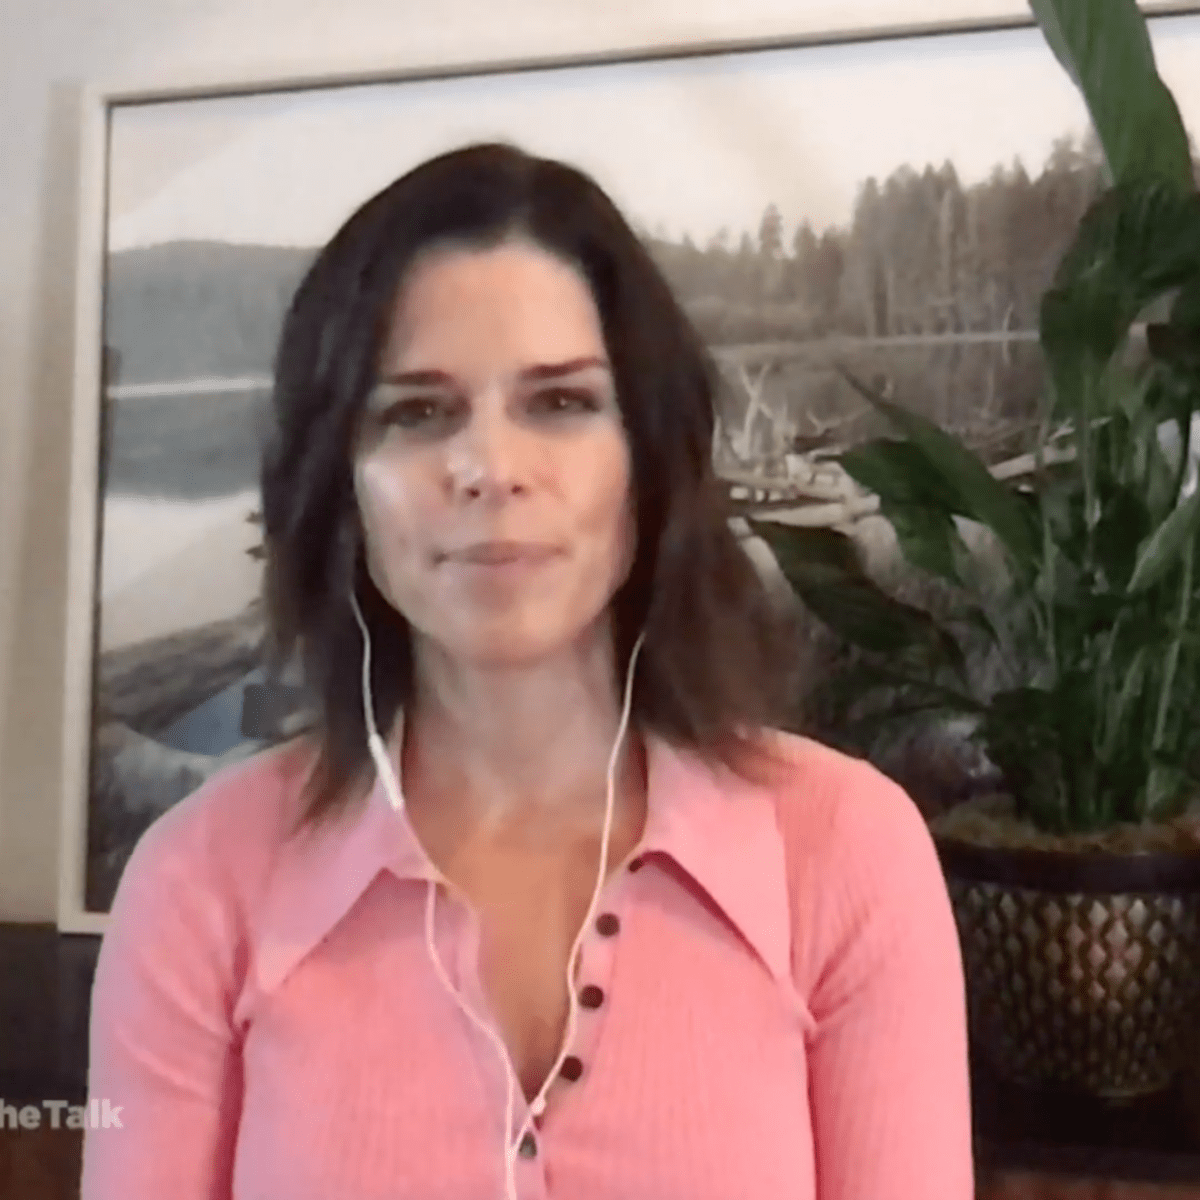 Pics of neve campbell